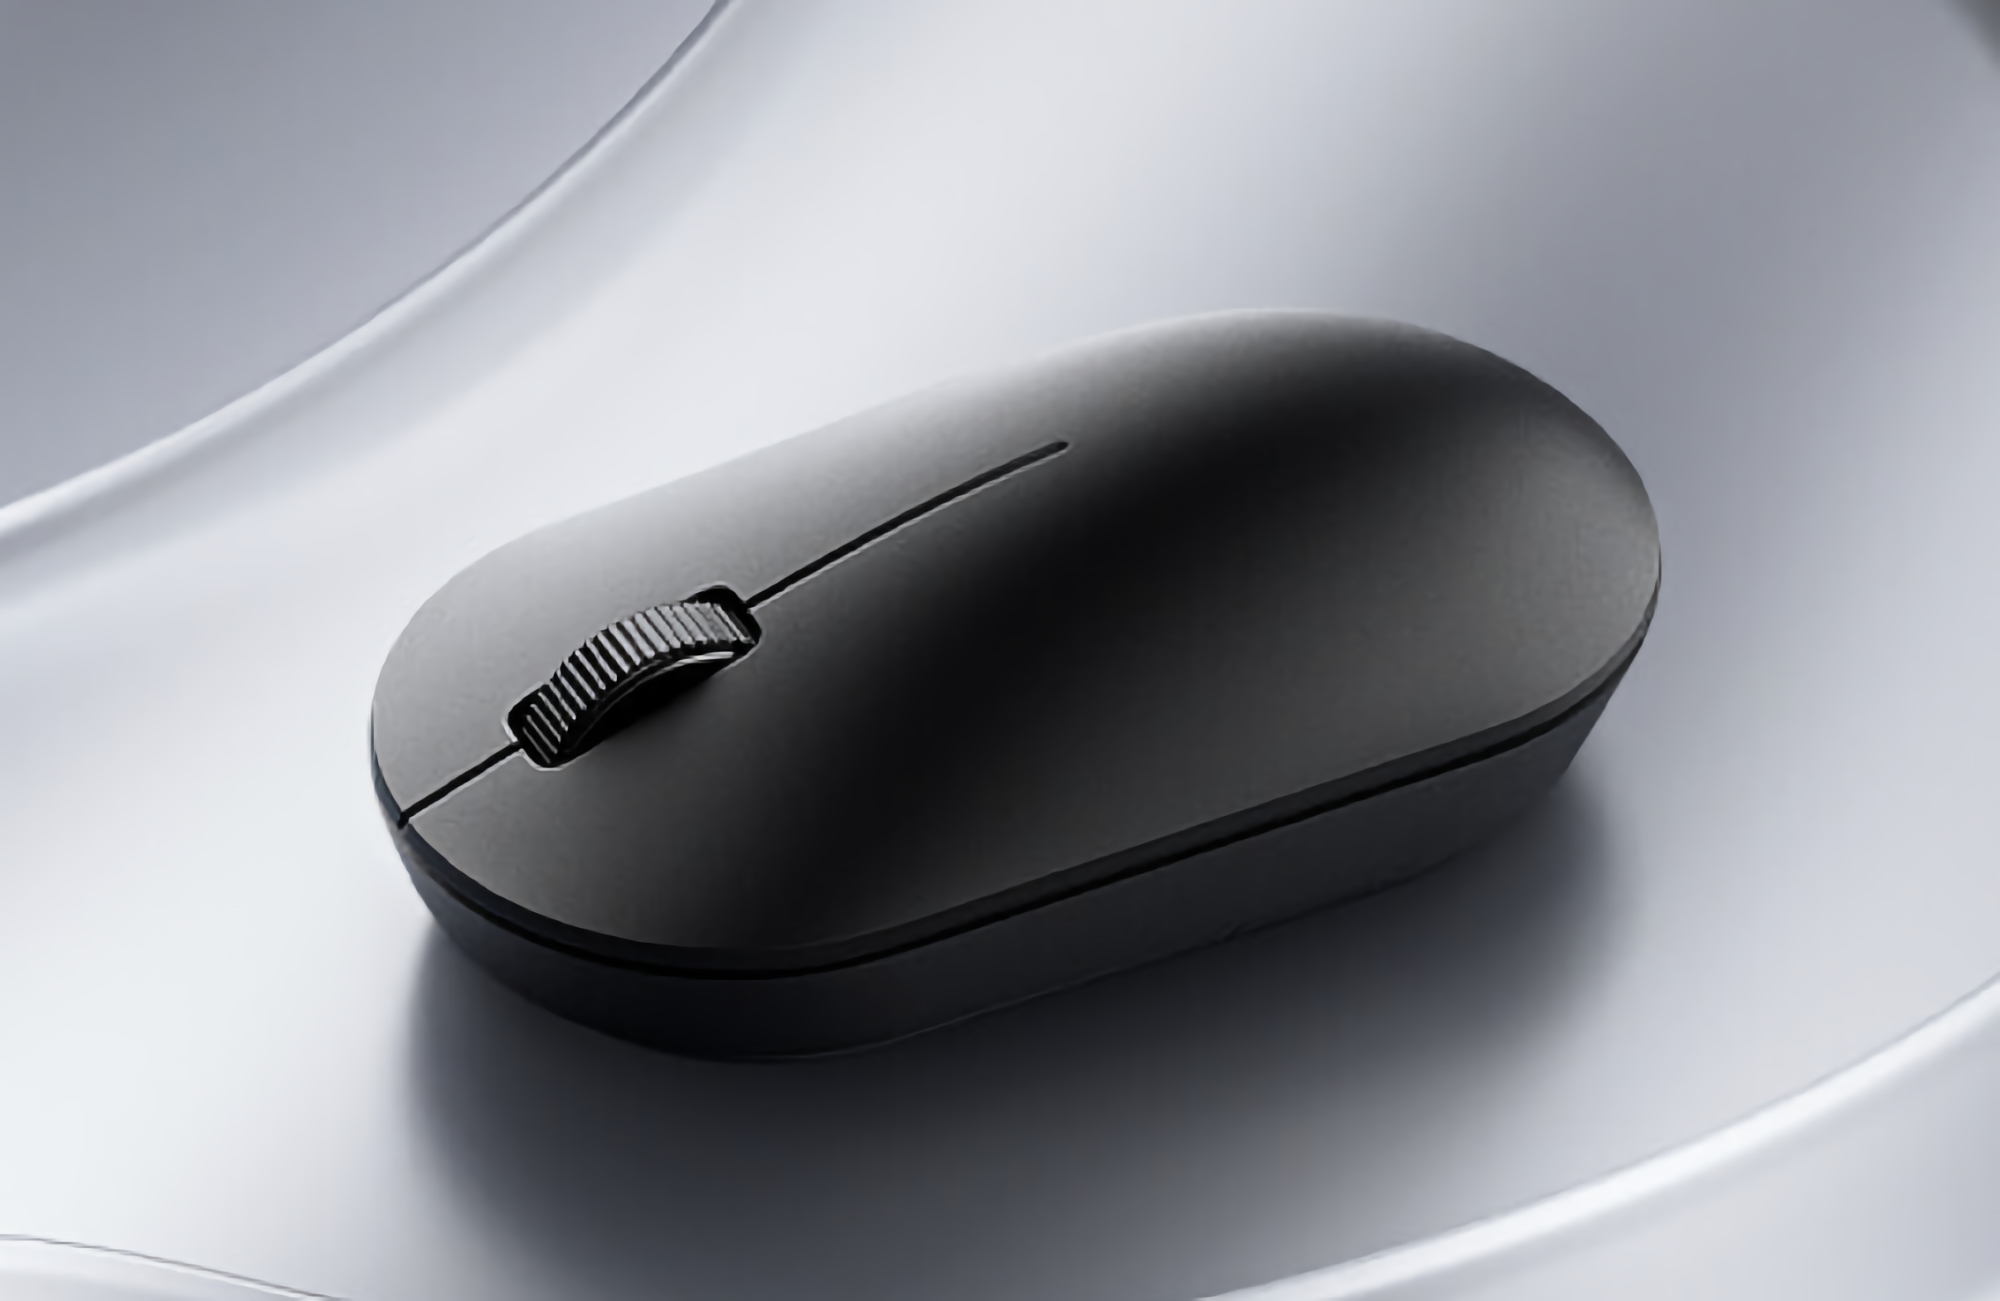 Xiaomi introduced Wireless Mouse Lite 2 for $6